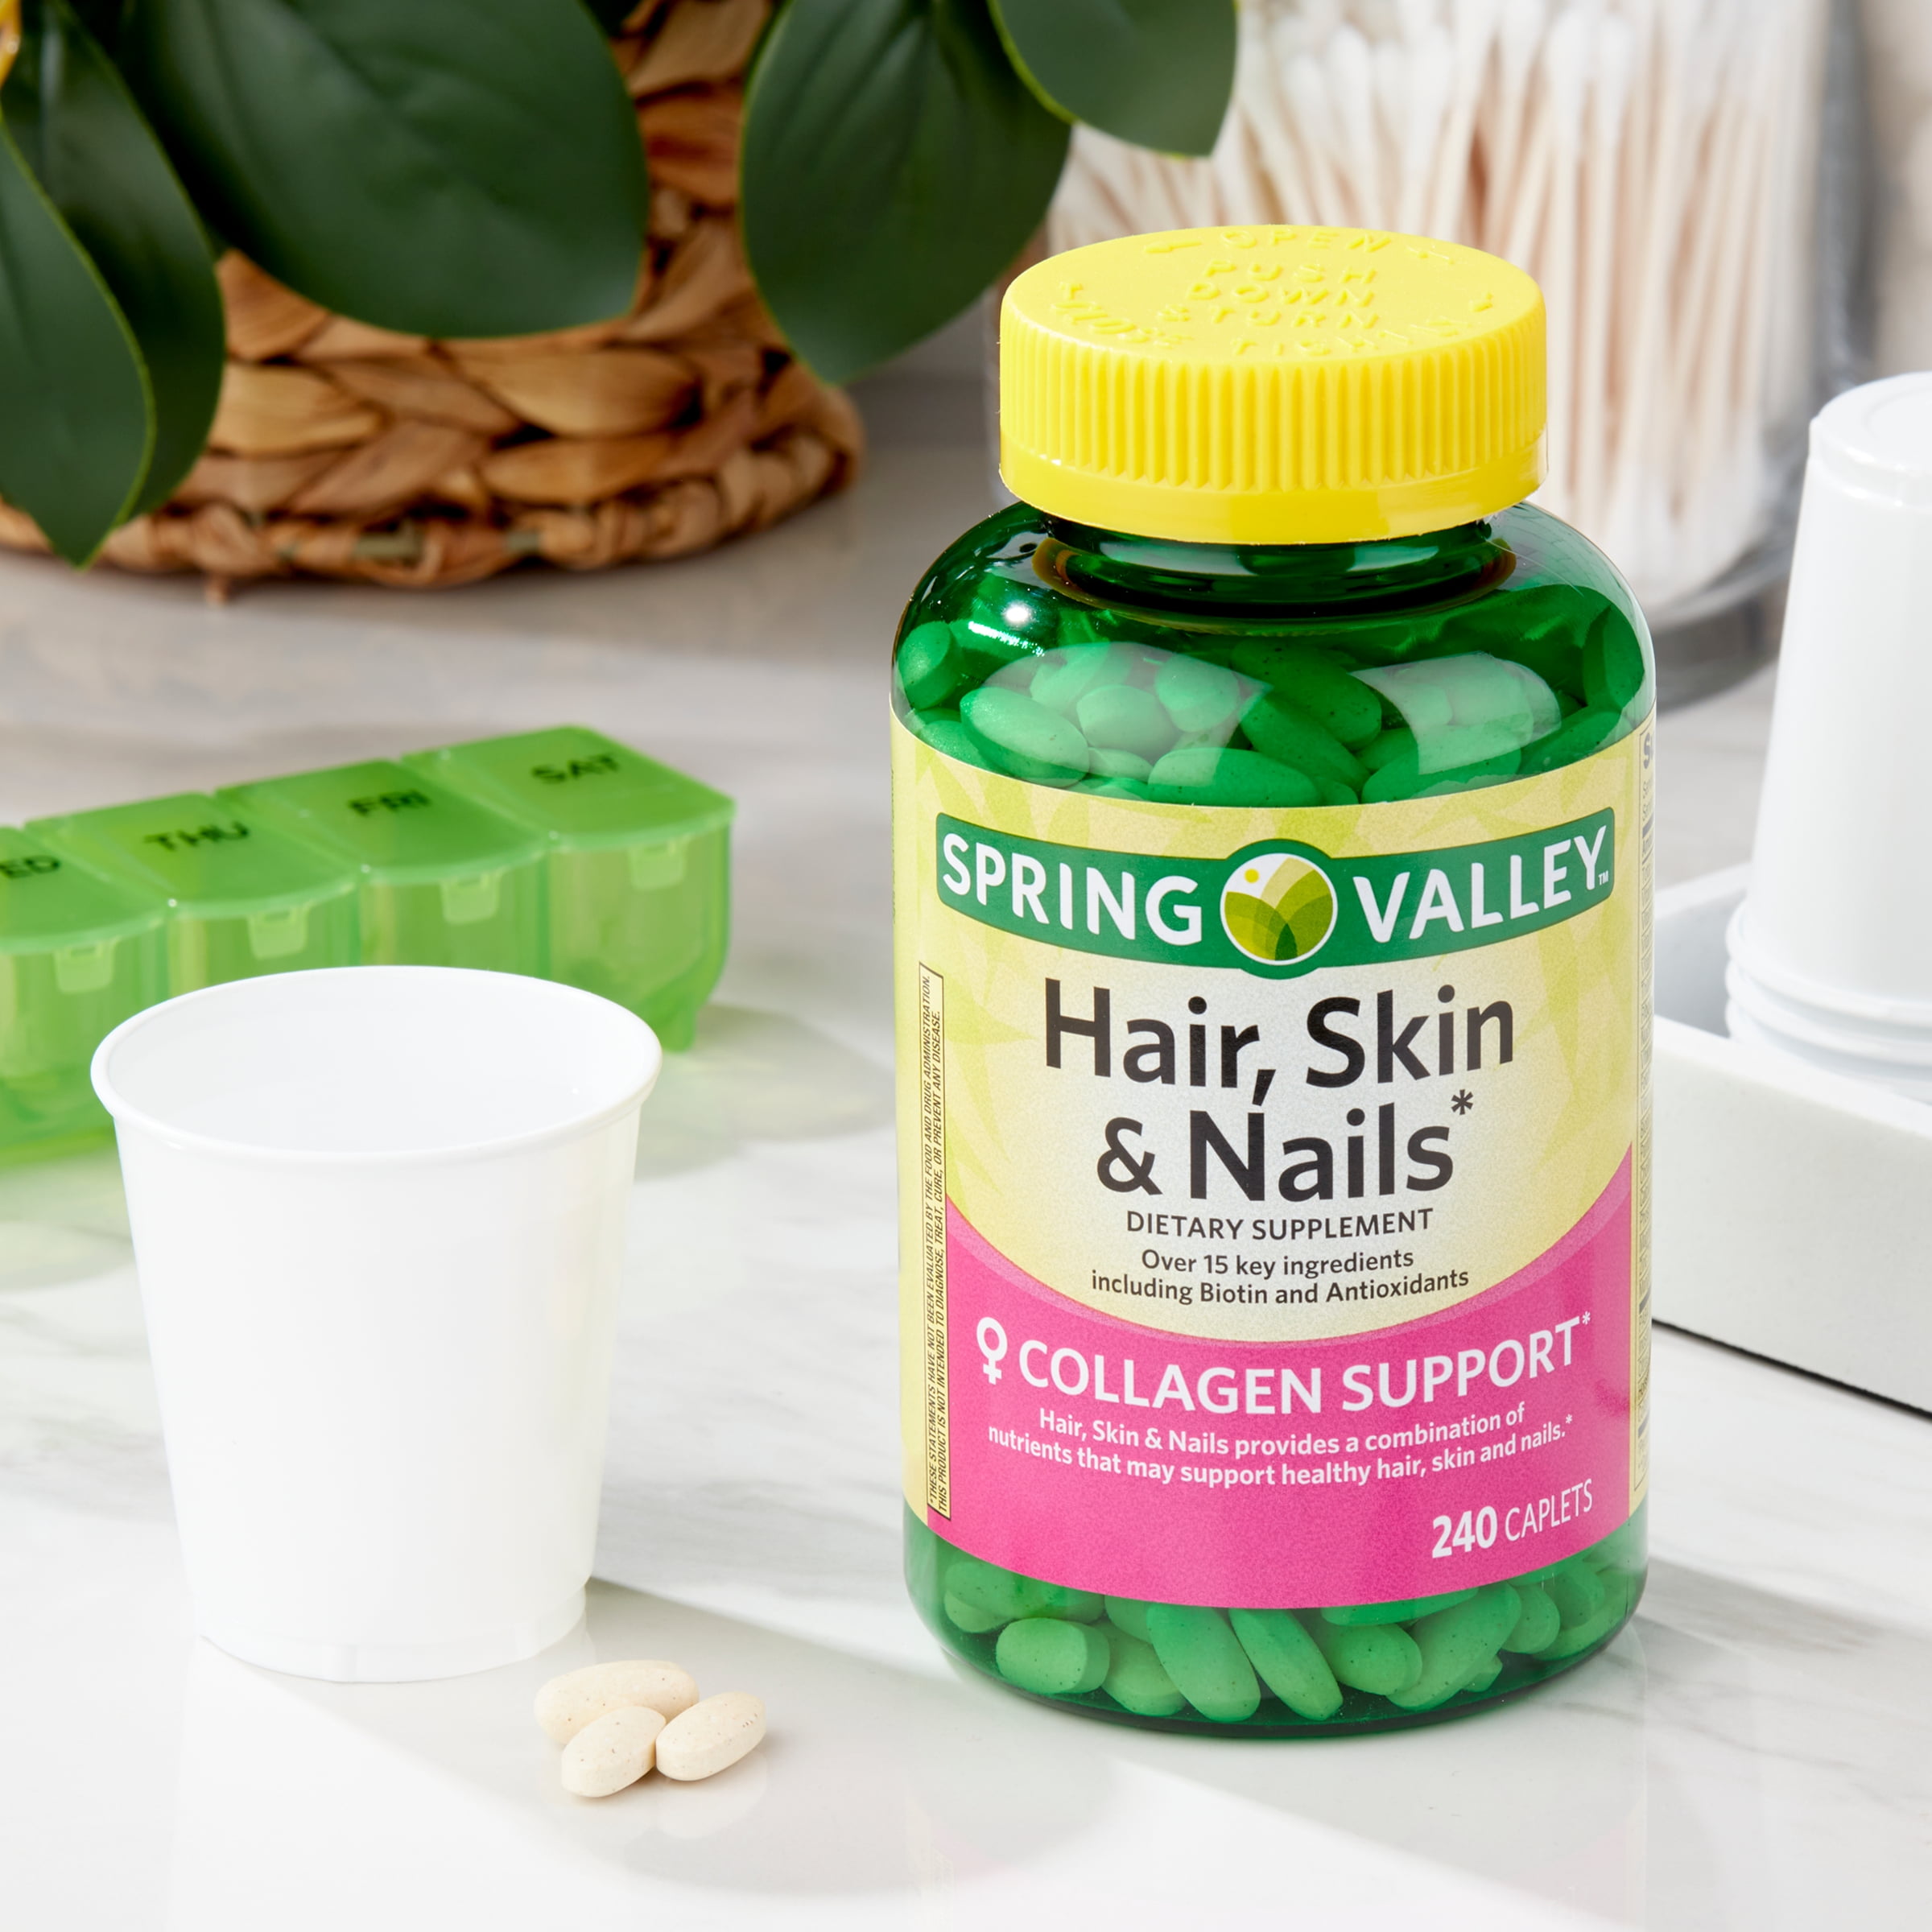 Spring Valley Hair, Skin & Nails Caplets Dietary Supplement, 240 Count -  